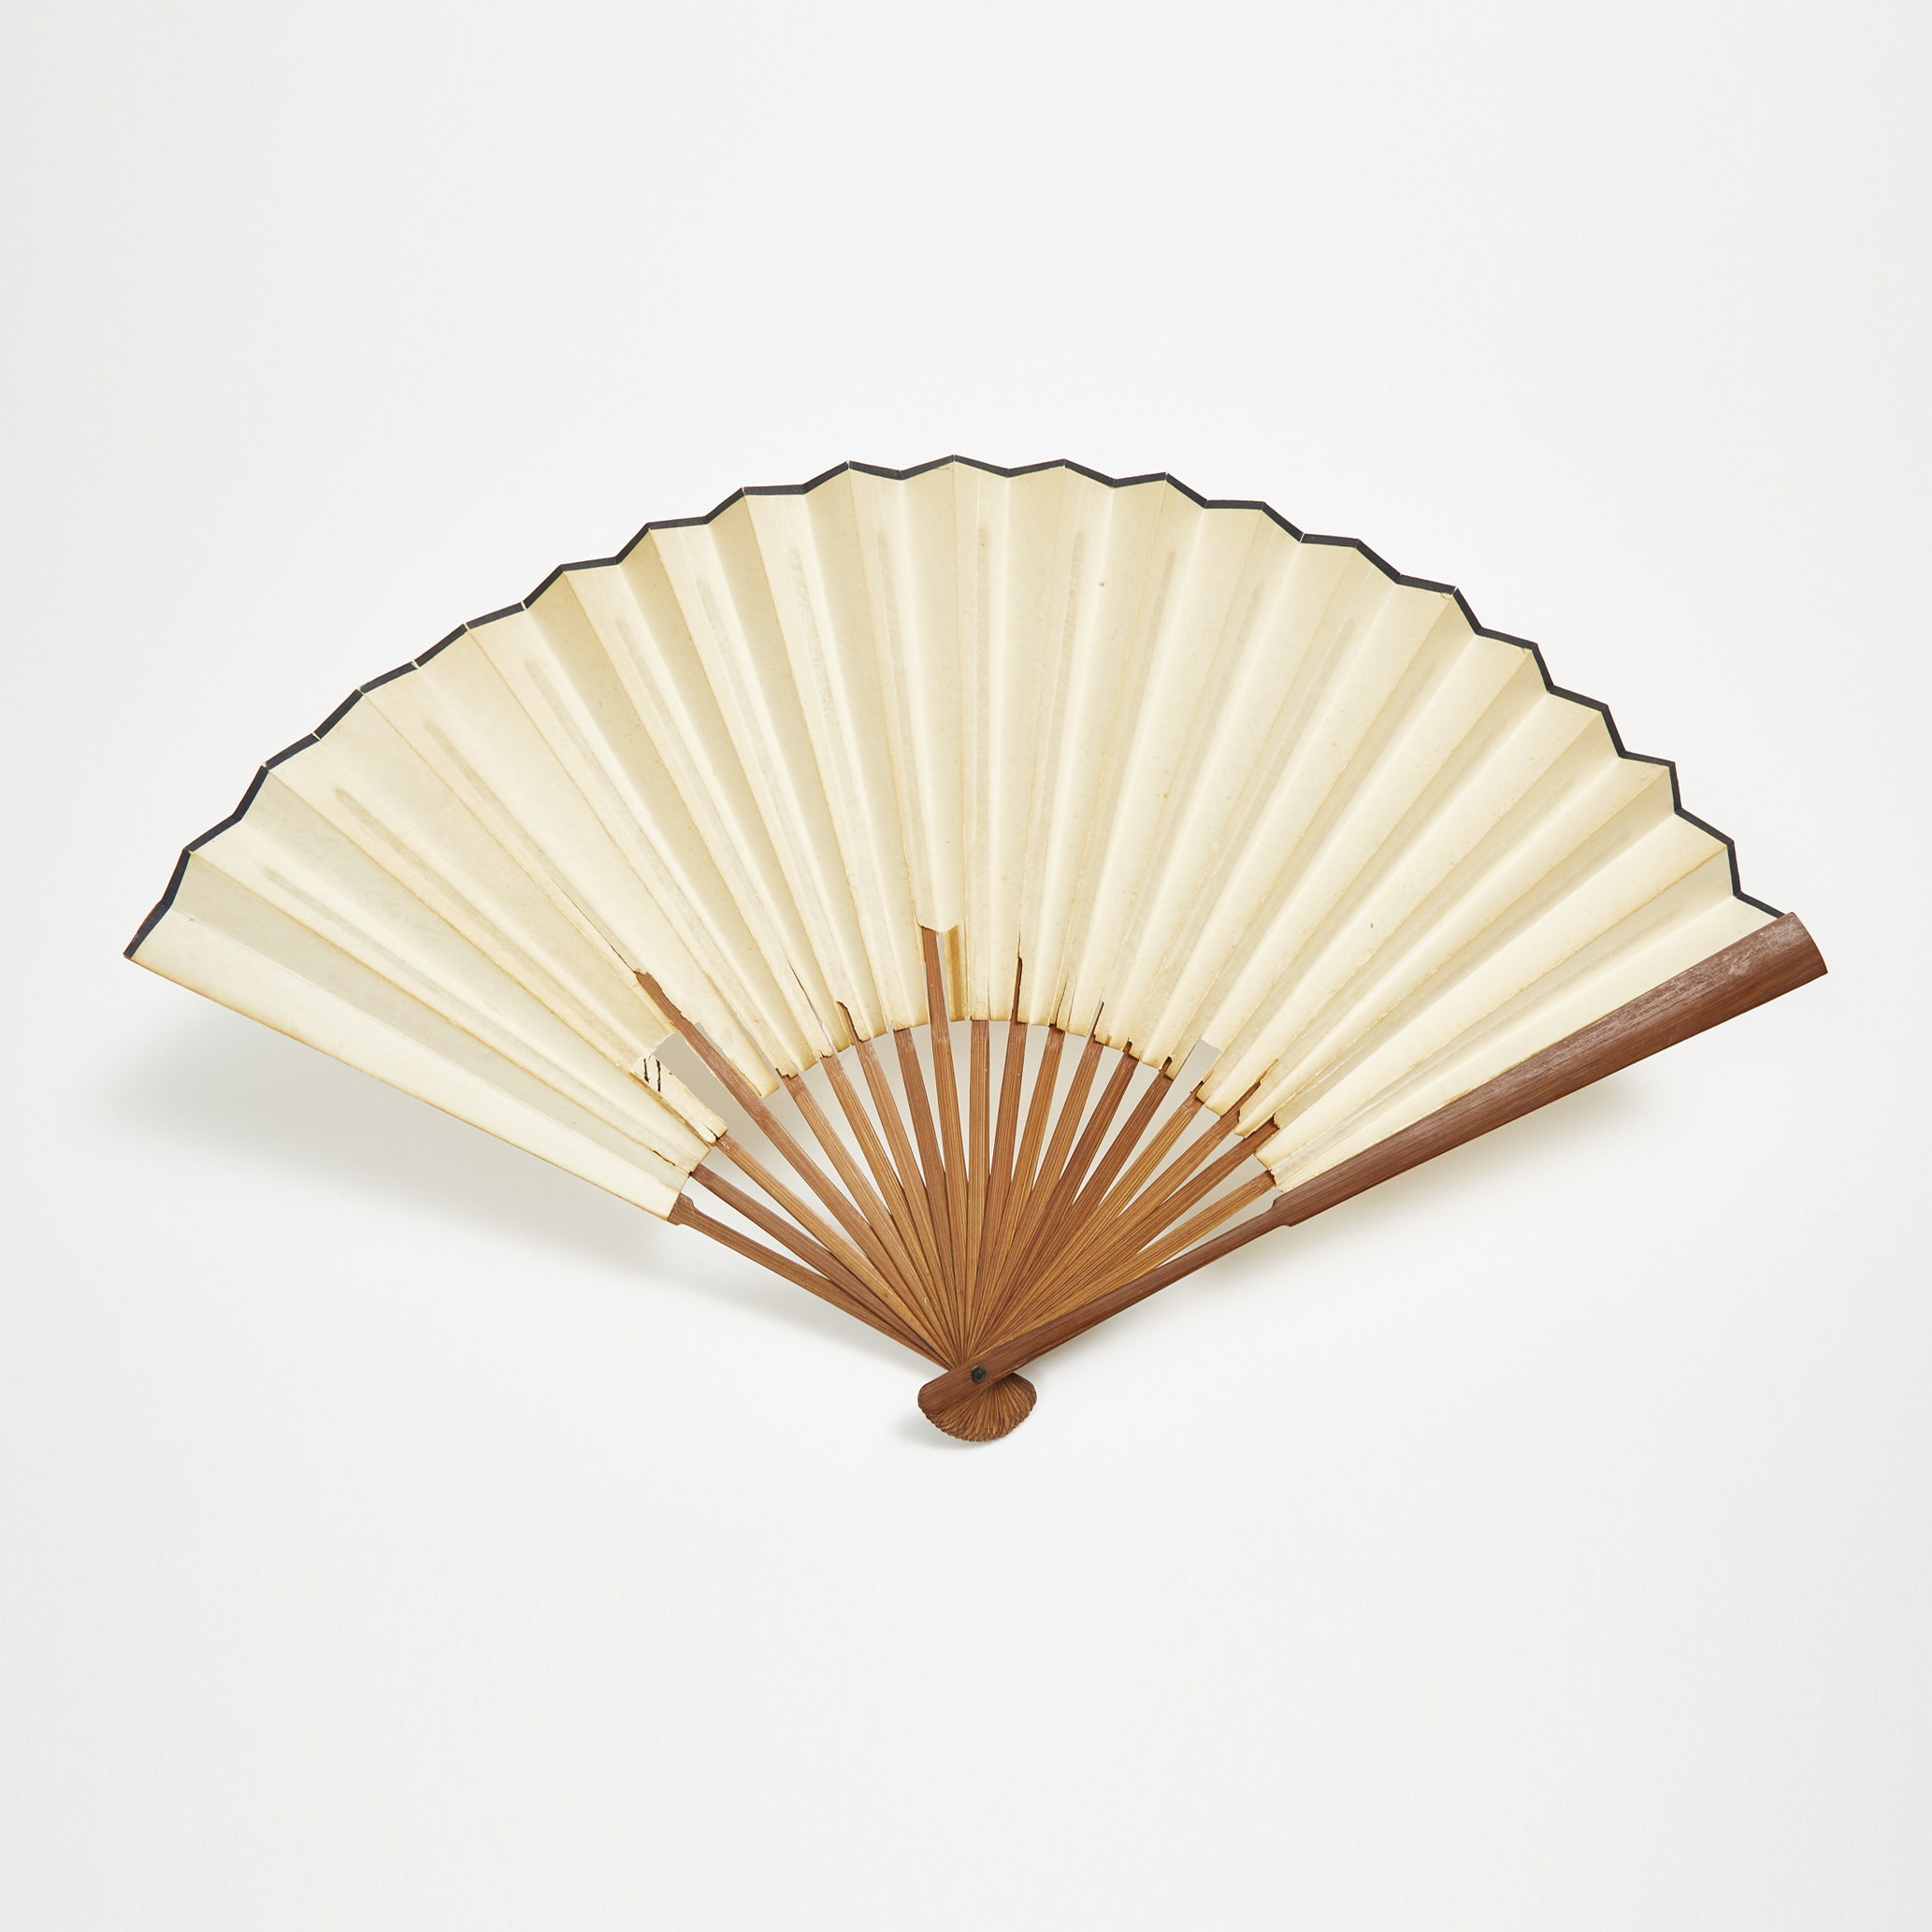 A Bamboo Folding Fan with Calligraphy